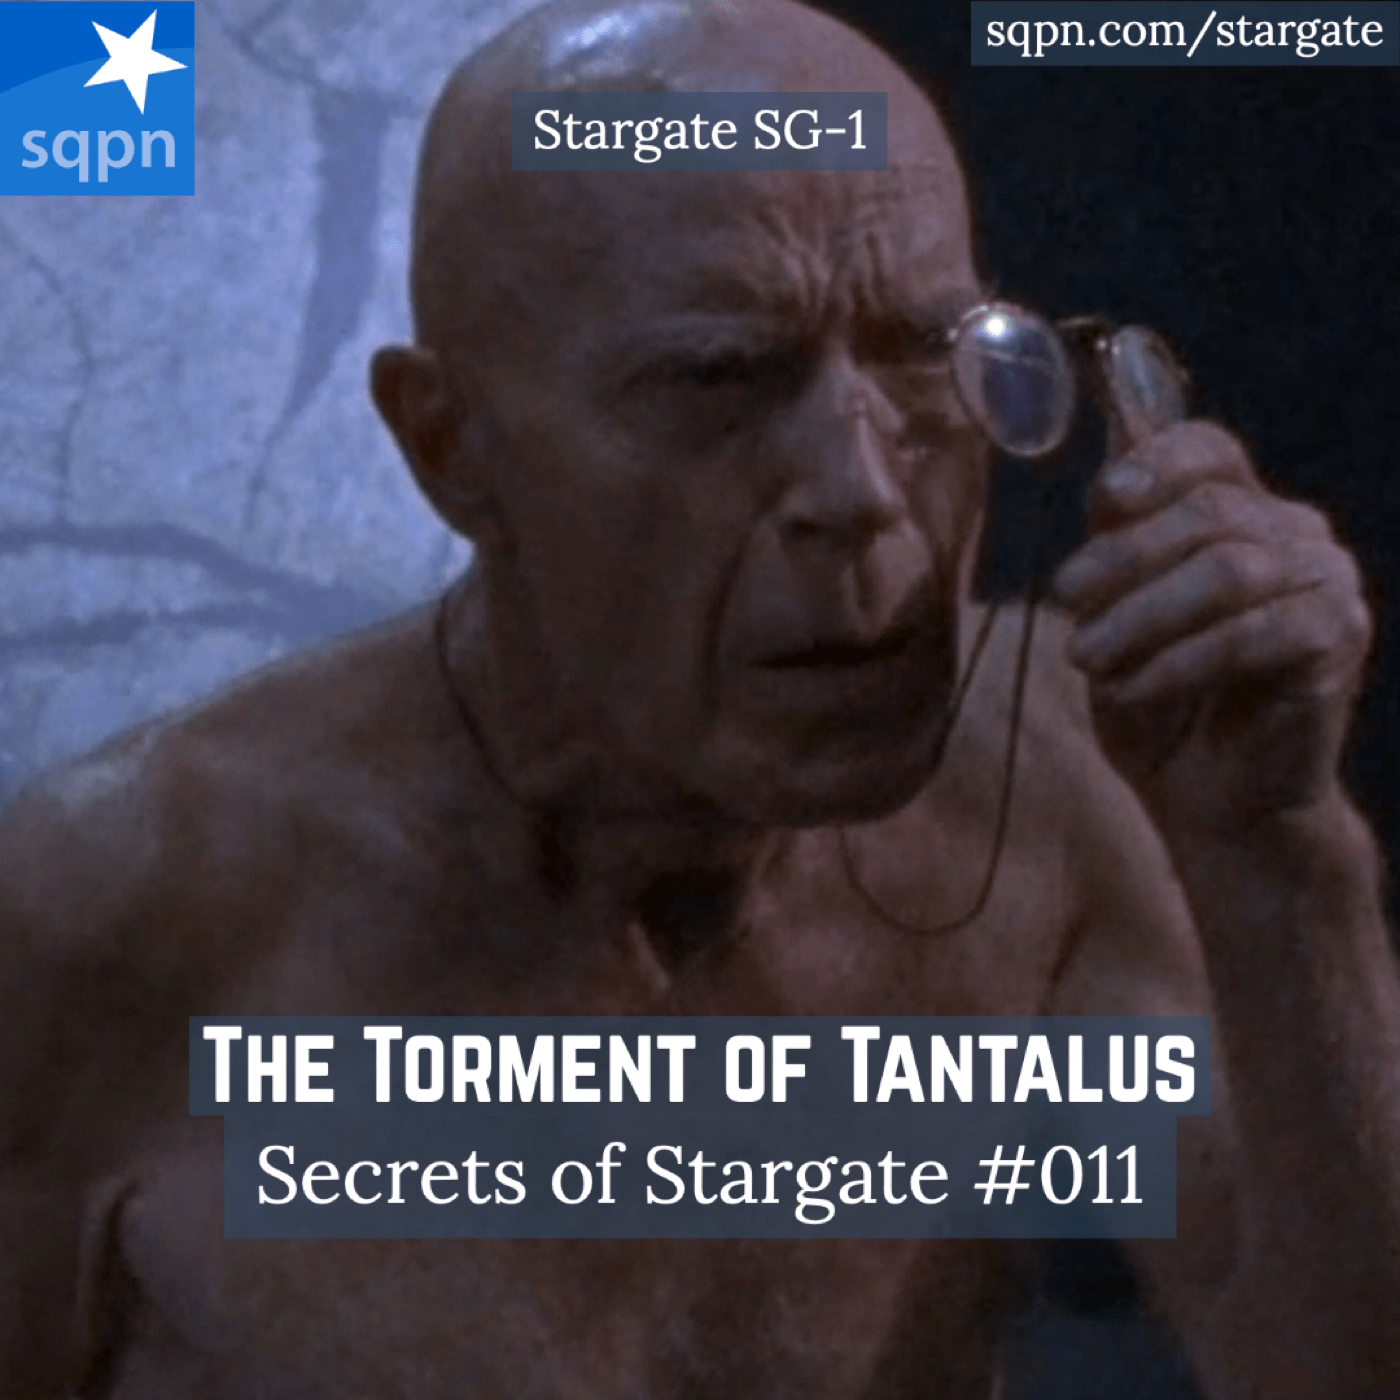 The Torment of Tantalus